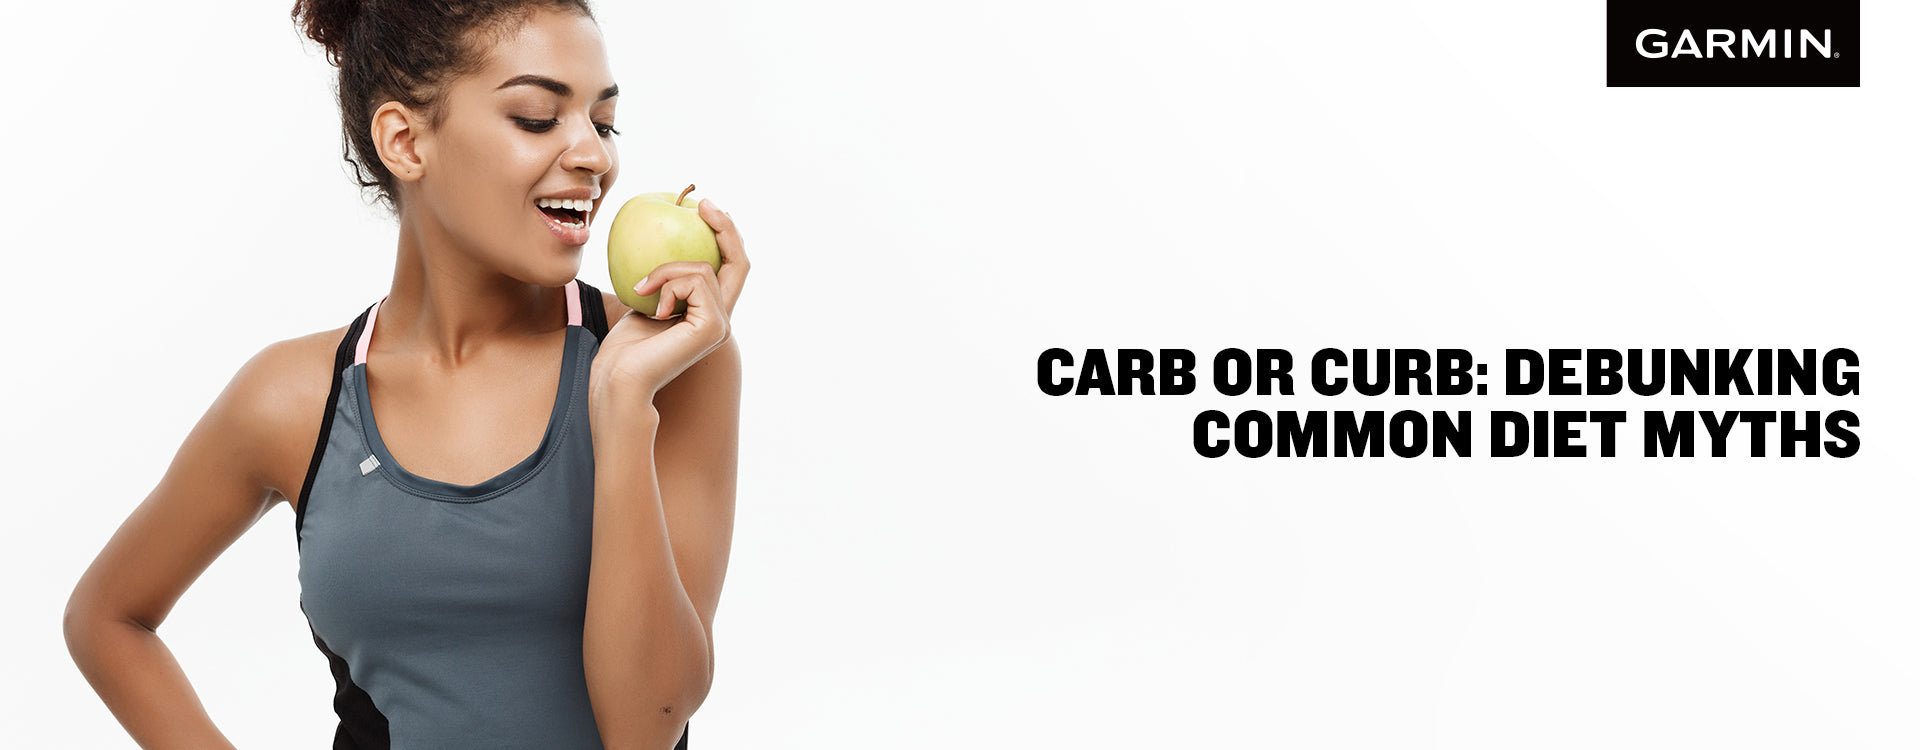 Carb or Curb: Debunking Common Diet Myths